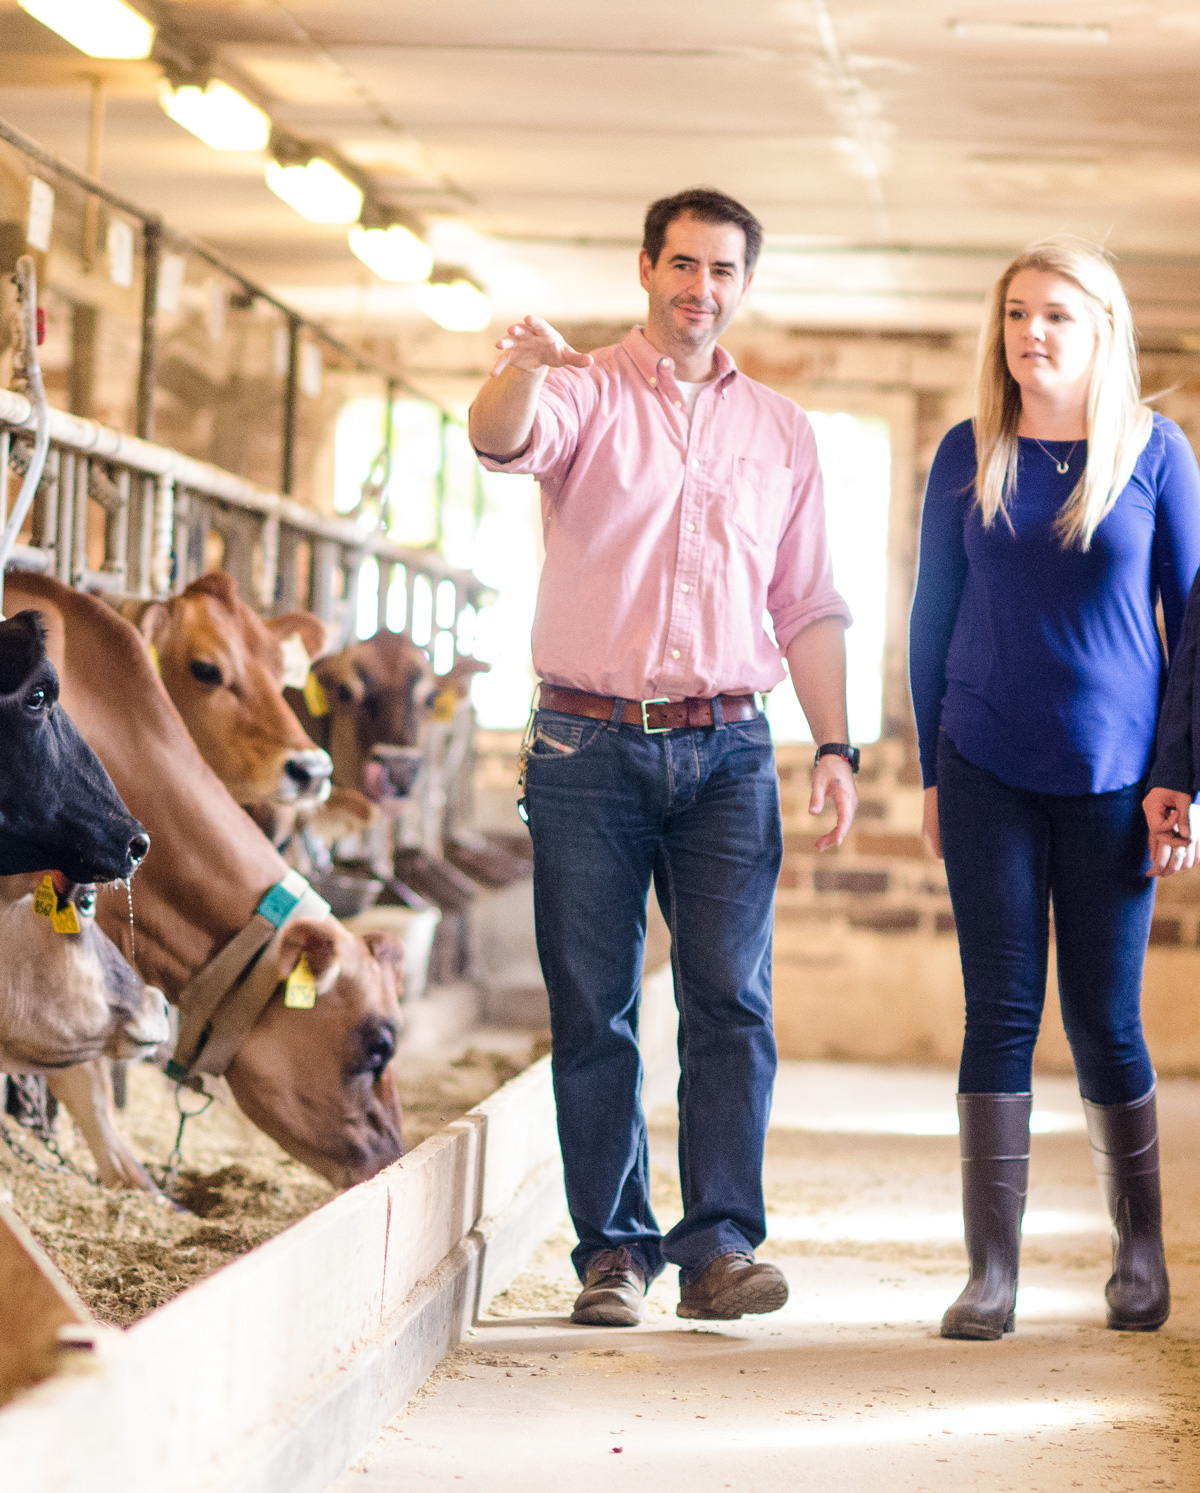 Instructor with students in dairy barn.